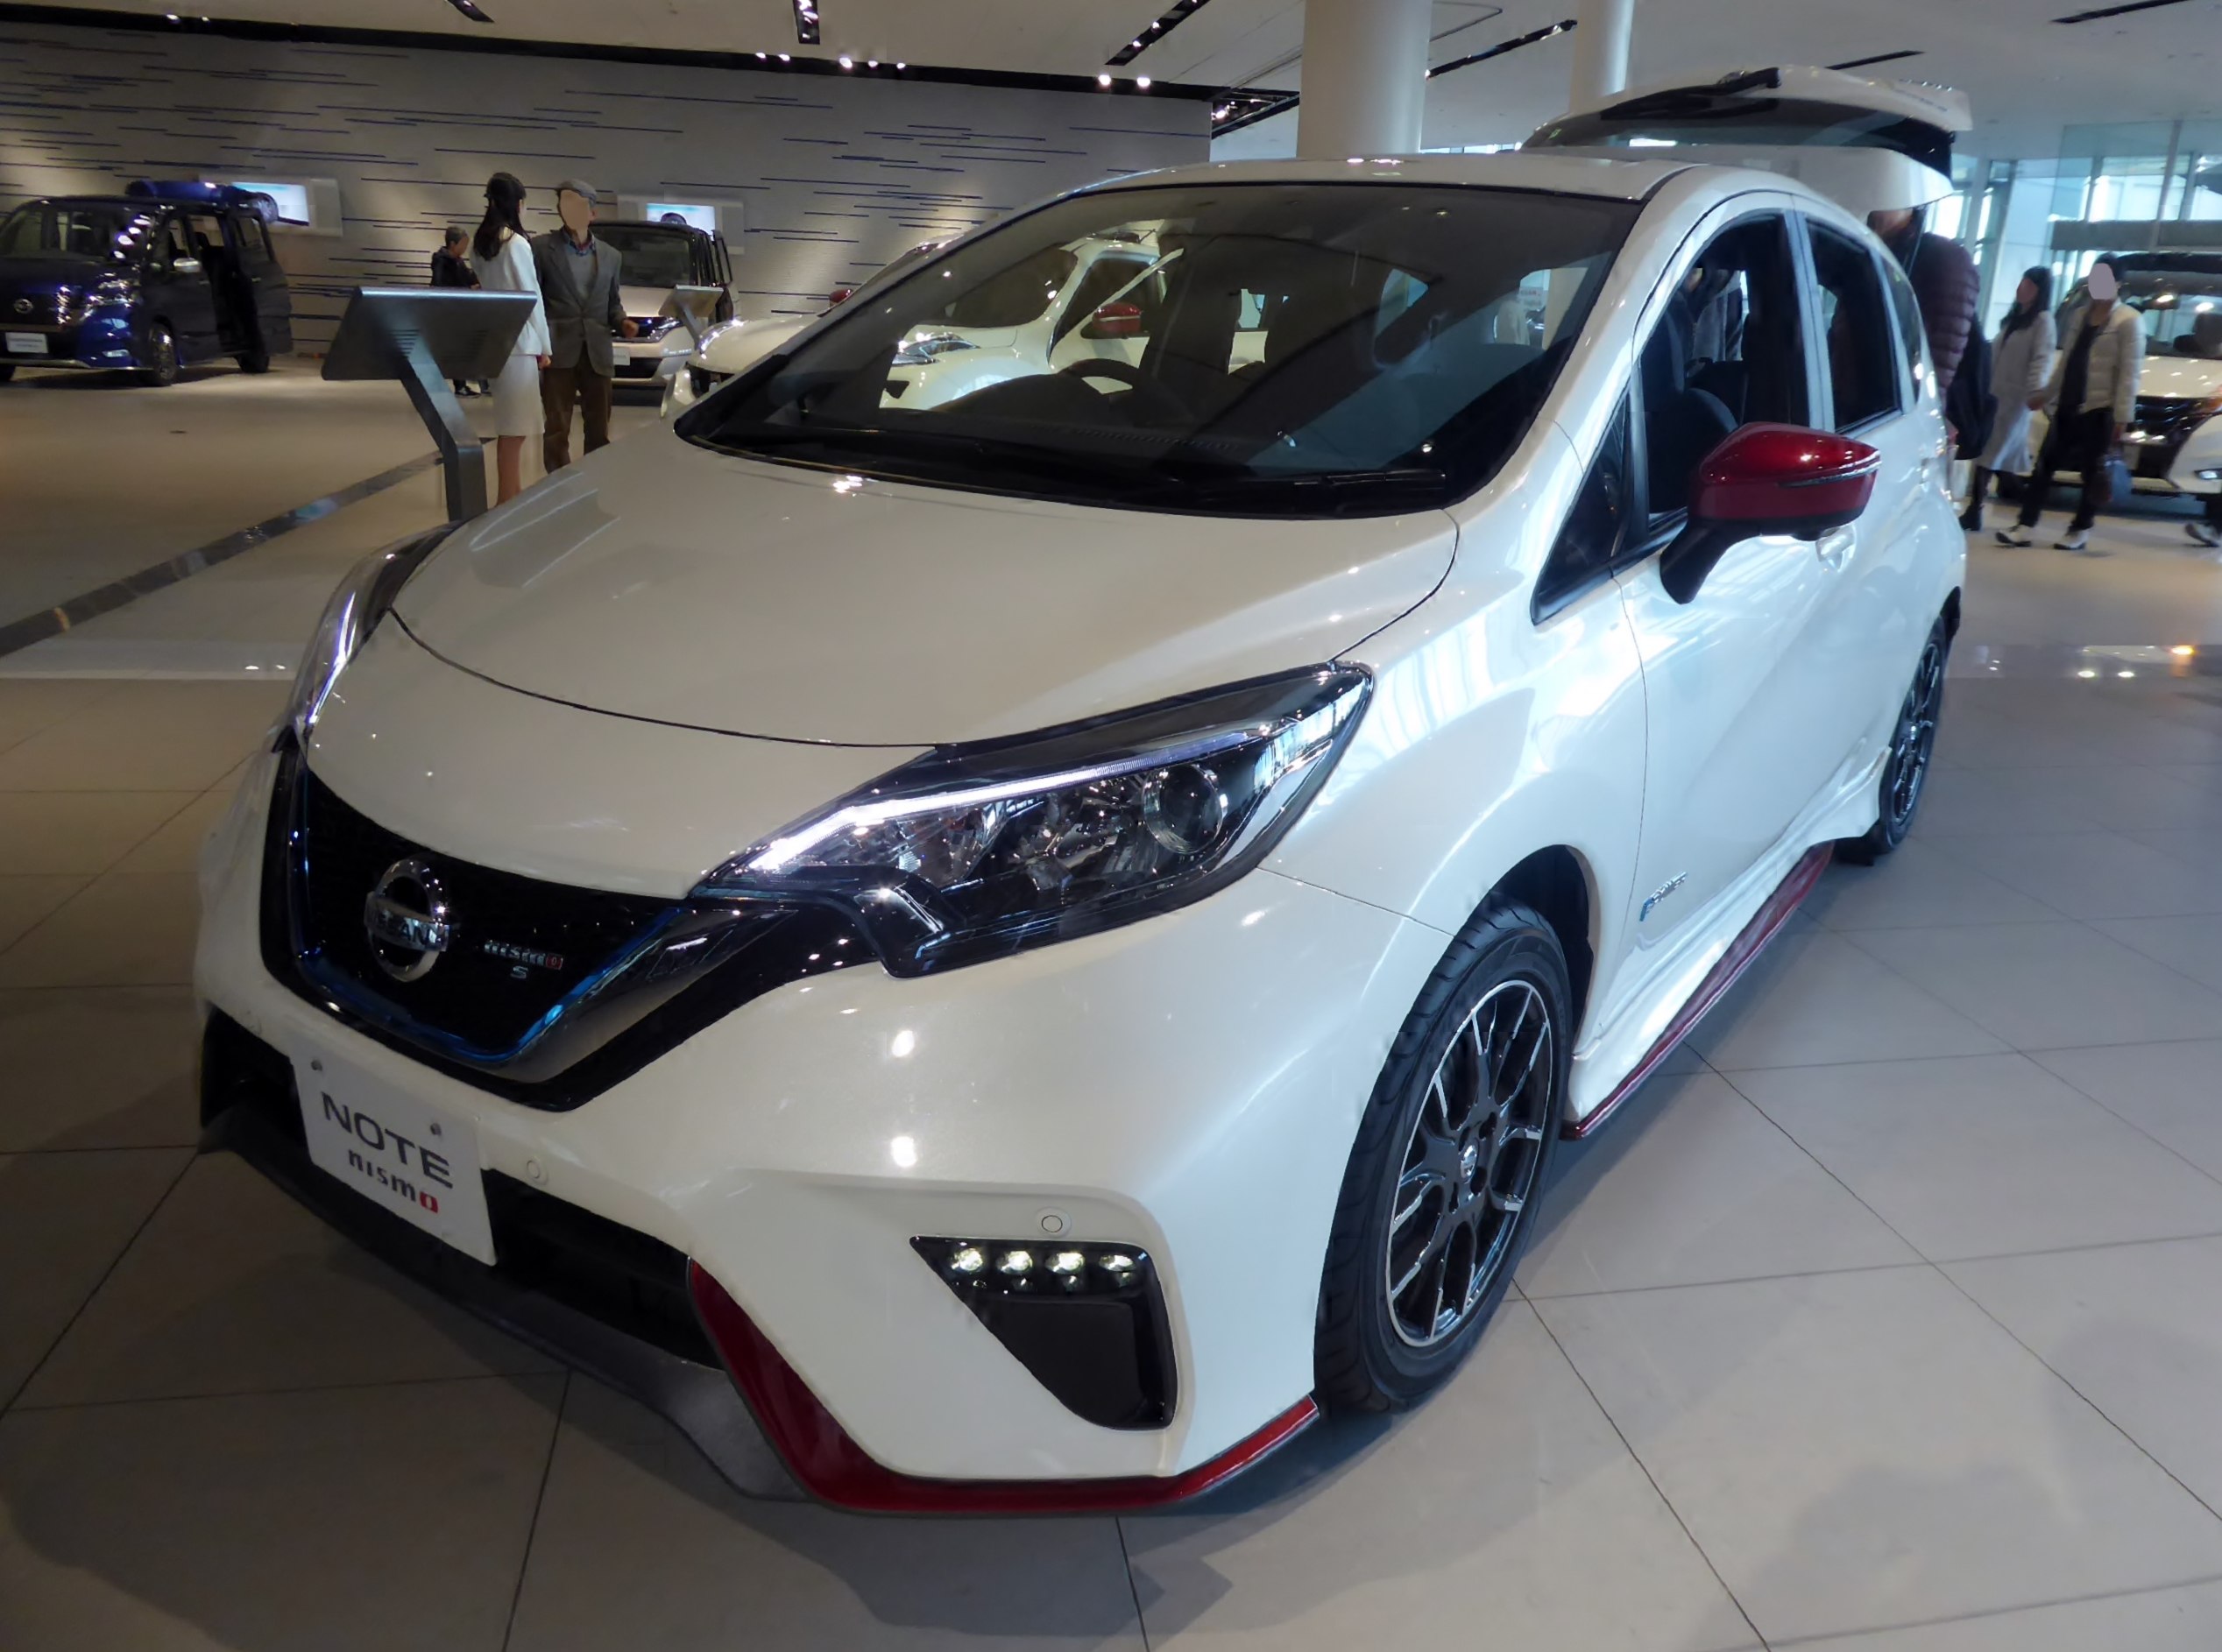 Nissan note he12. Nissan Note e-Power Nismo. Nissan Note e-Power Nismo 2020. Nissan Note e Power e12 Nismo. Nissan Note e-Power 2018.